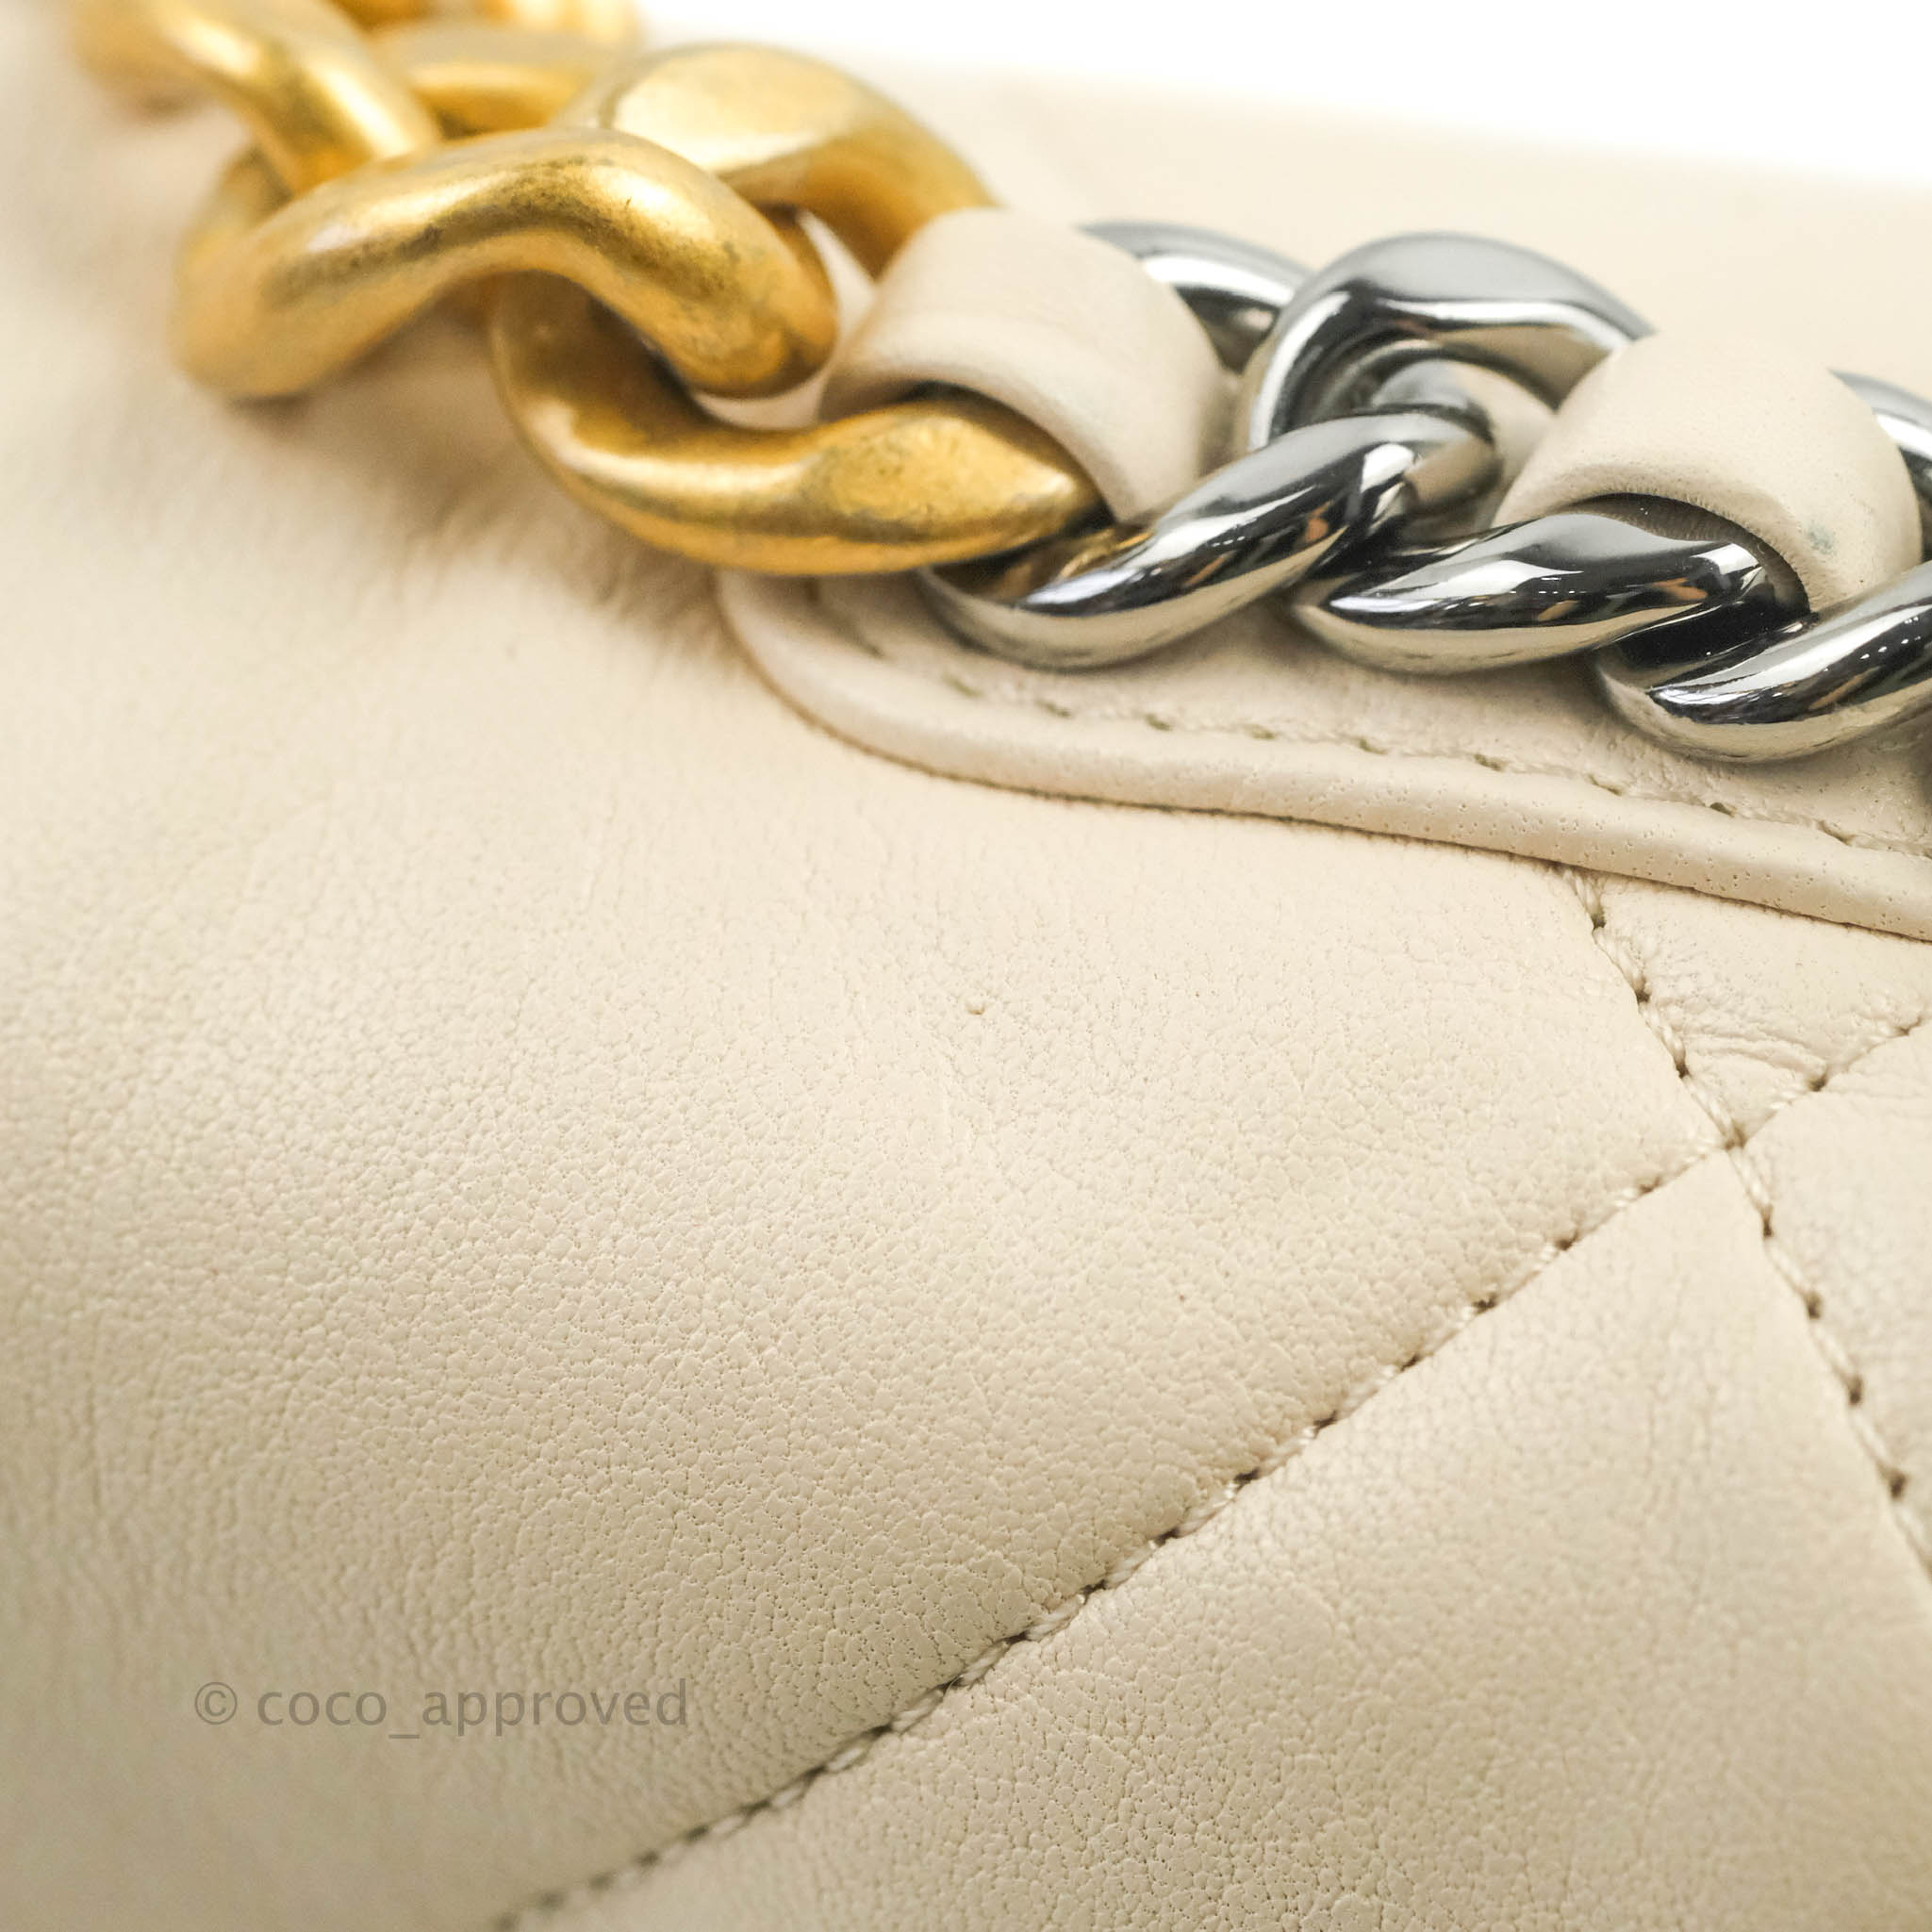 beige chanel 19 bag small